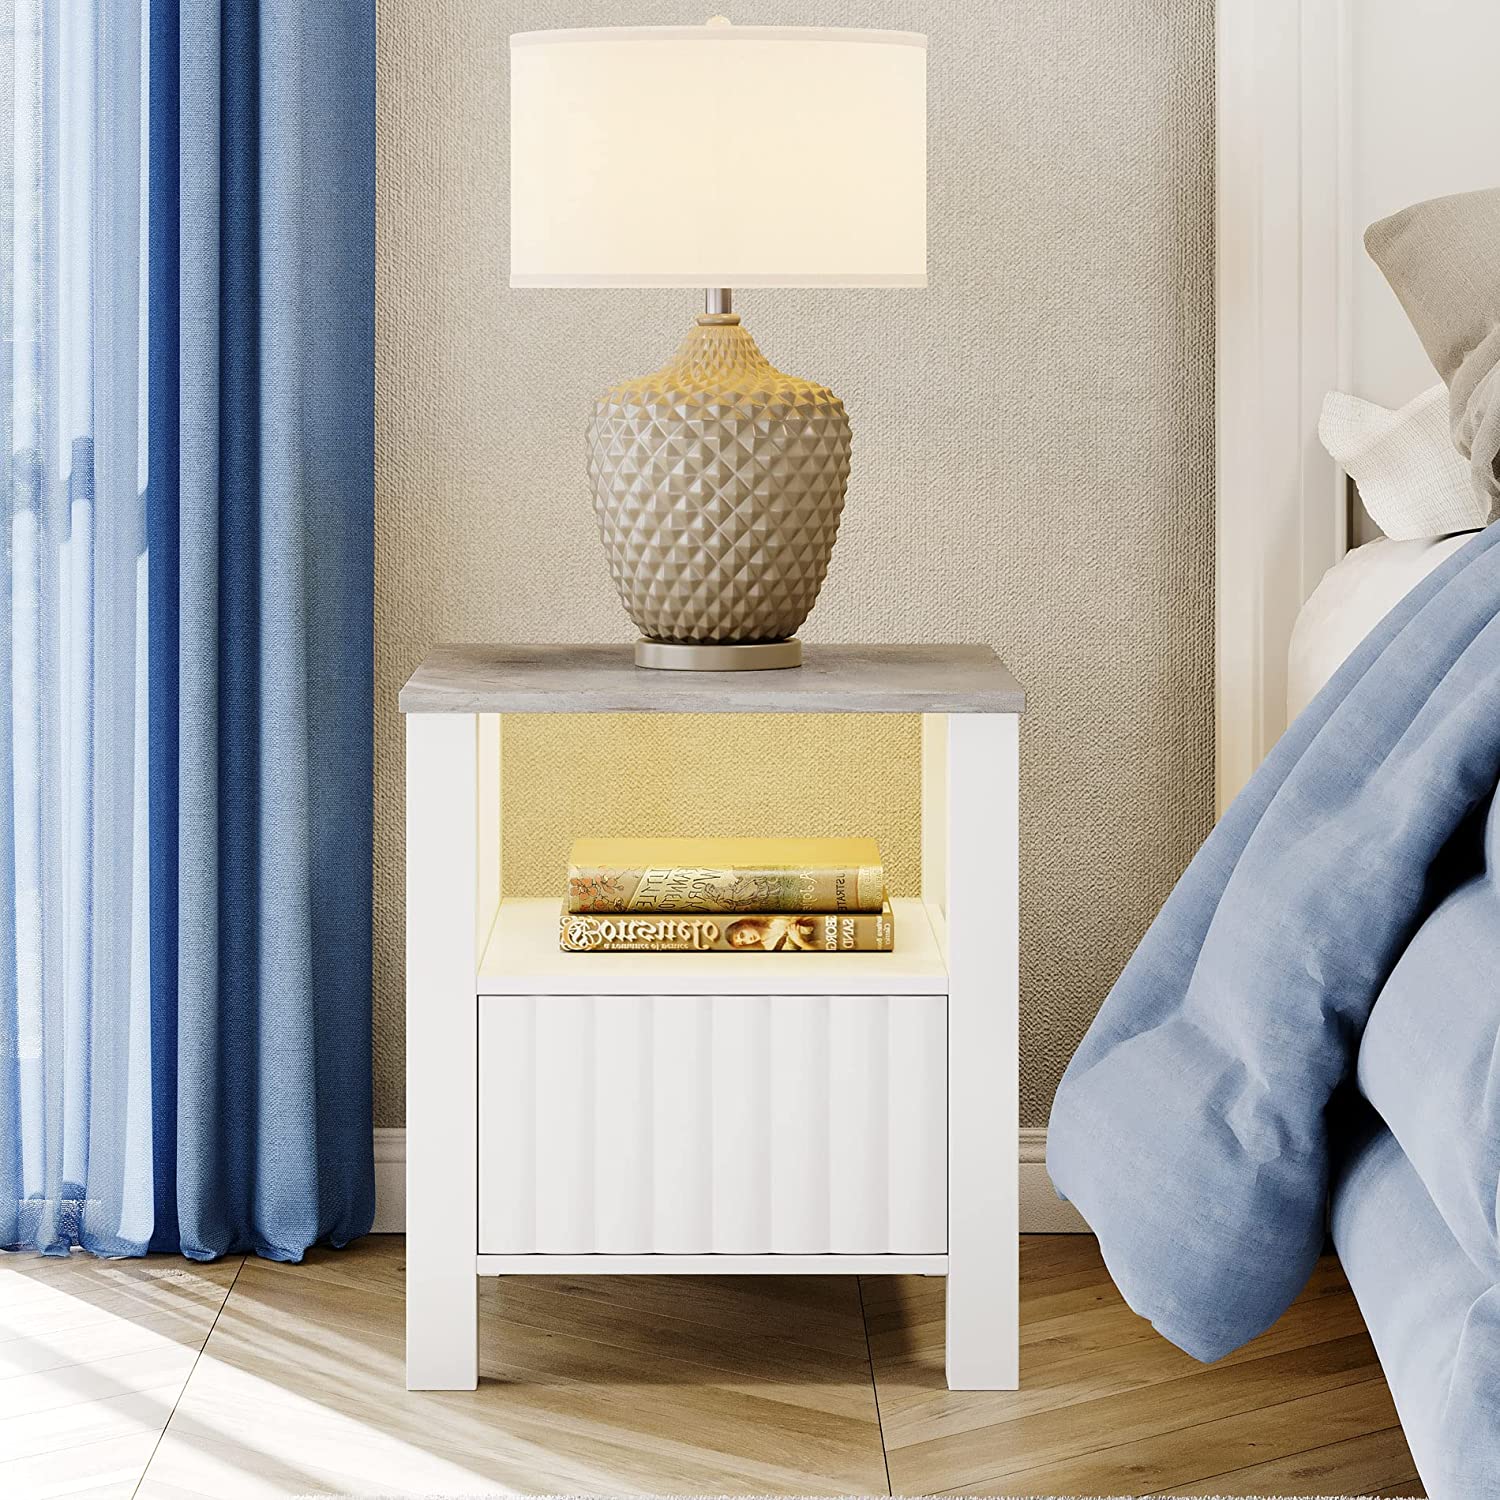 WAMPAT 17.6" White End Tables Wood Modern Night Stand Bedside Tables with LED Light & Storage Cabinet, Small Side Table for Living Room